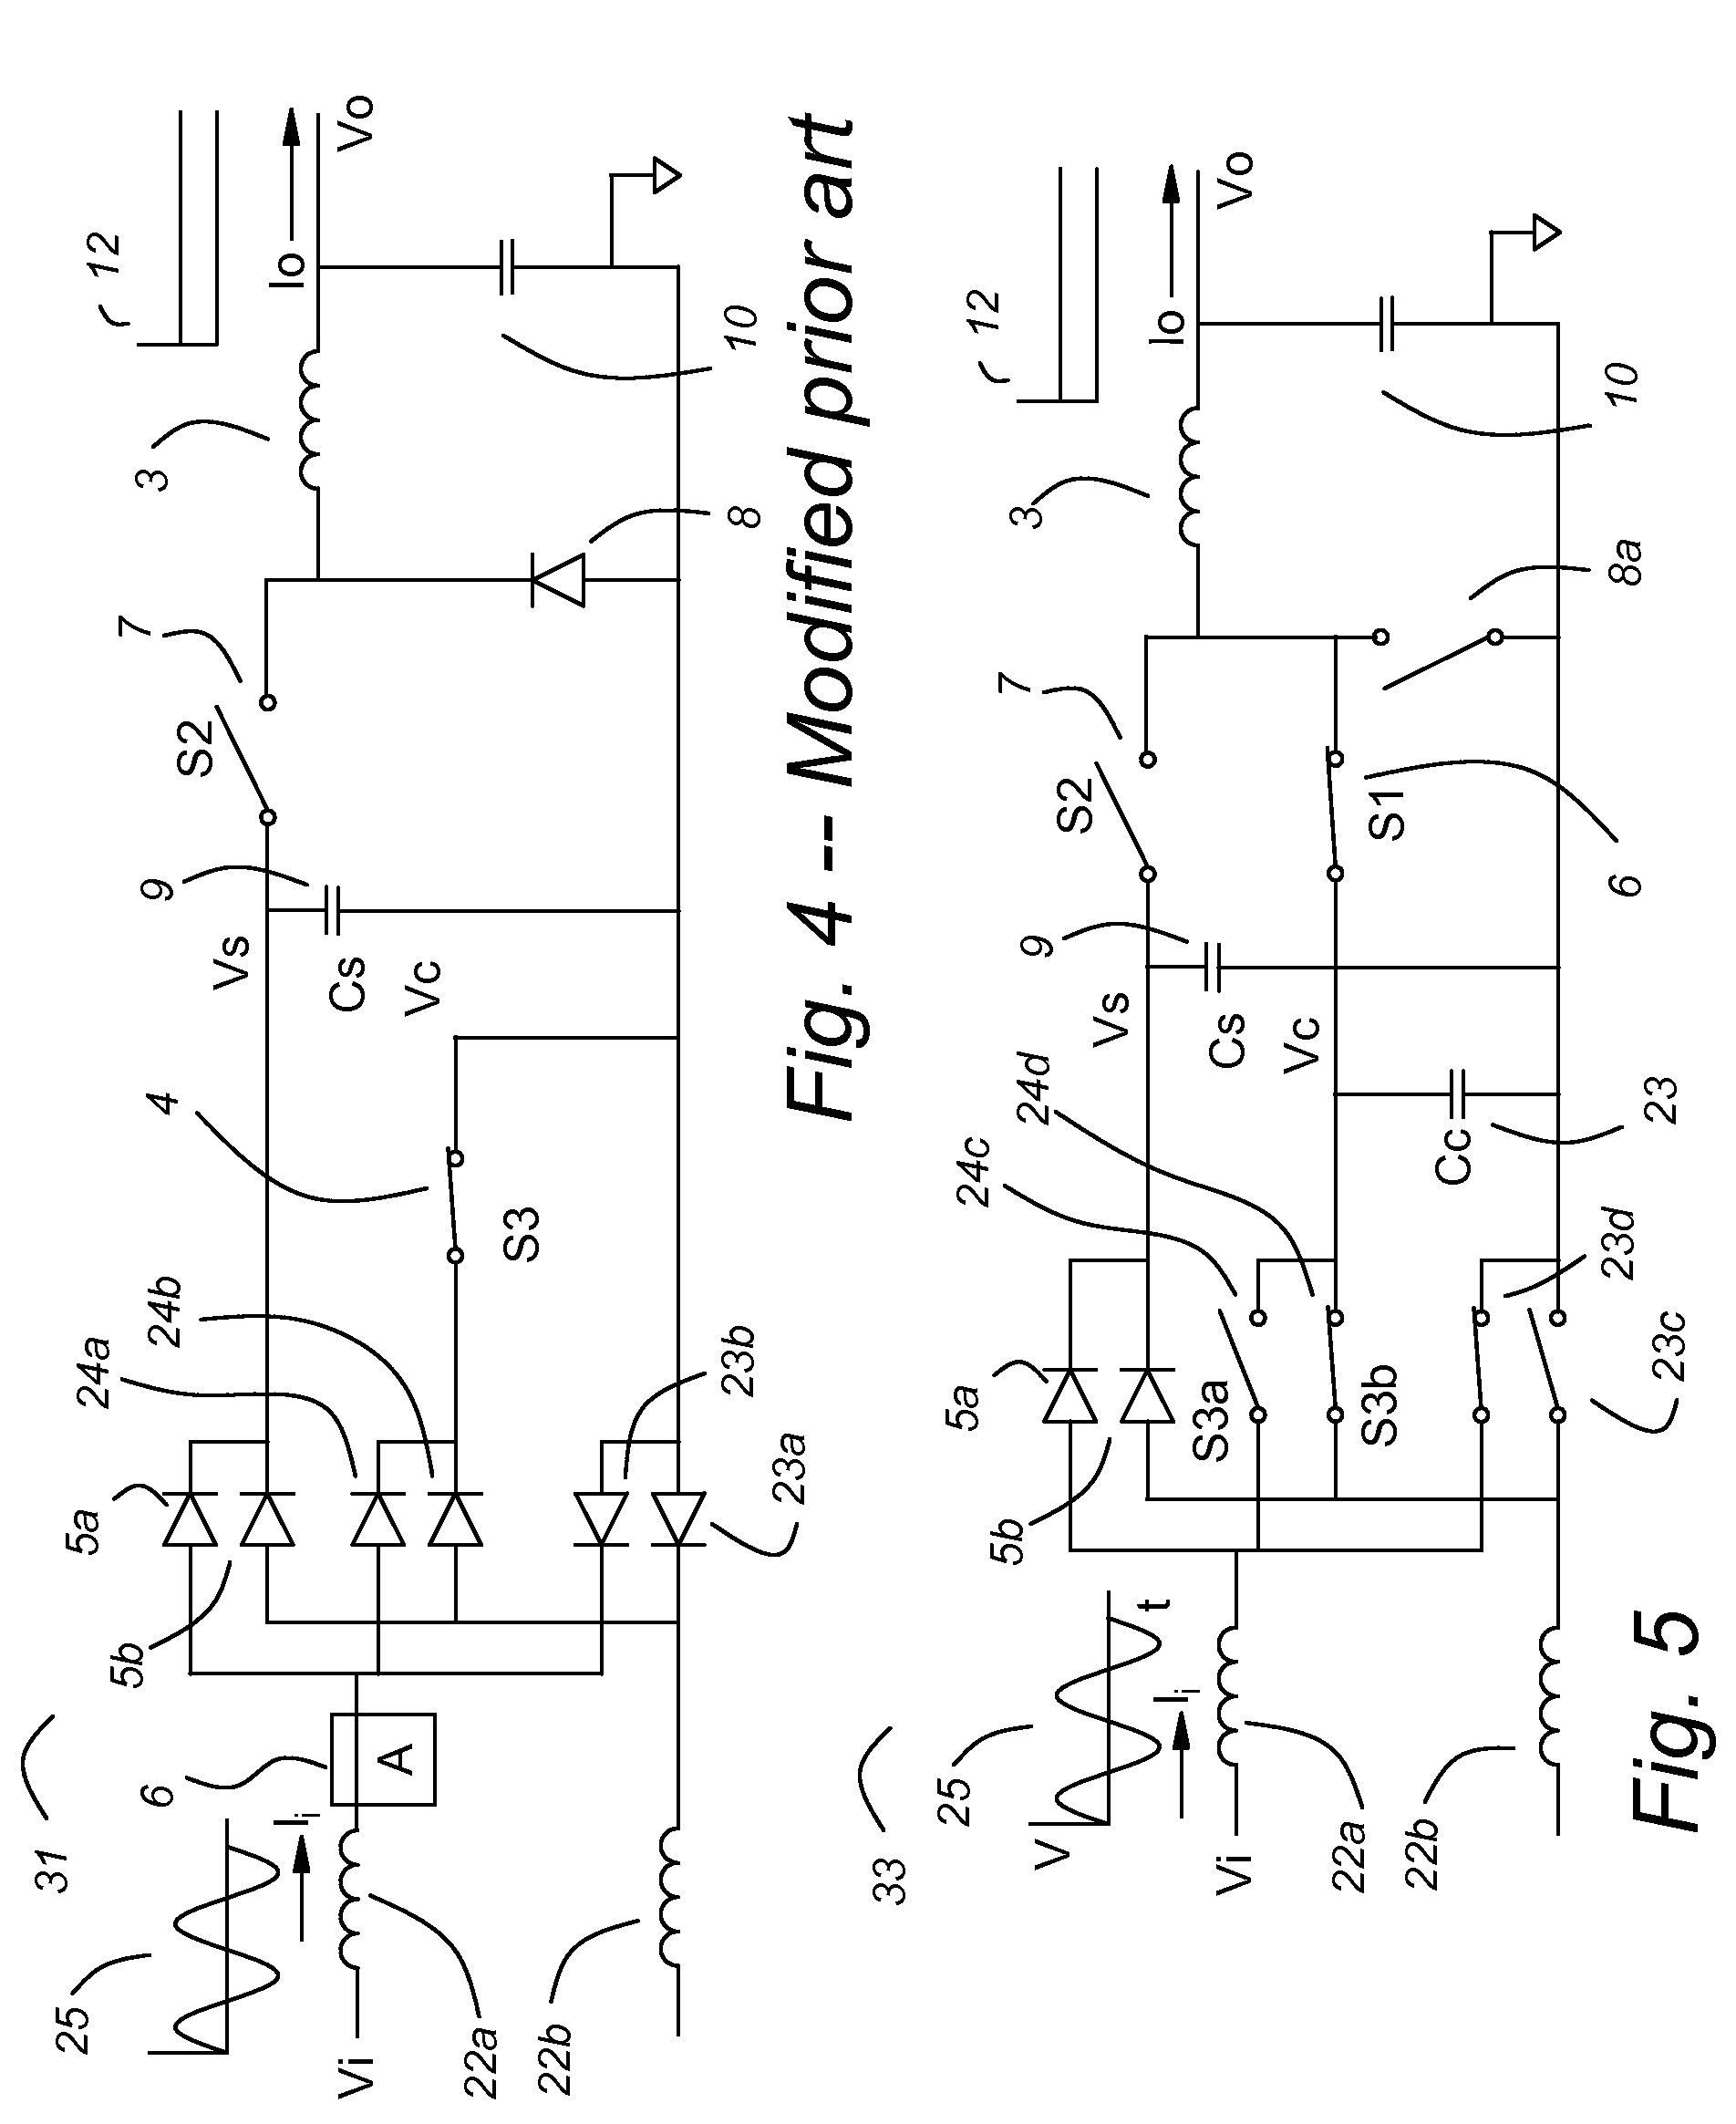 Power factor corrected single-phase AC-DC power converter using natural modulation